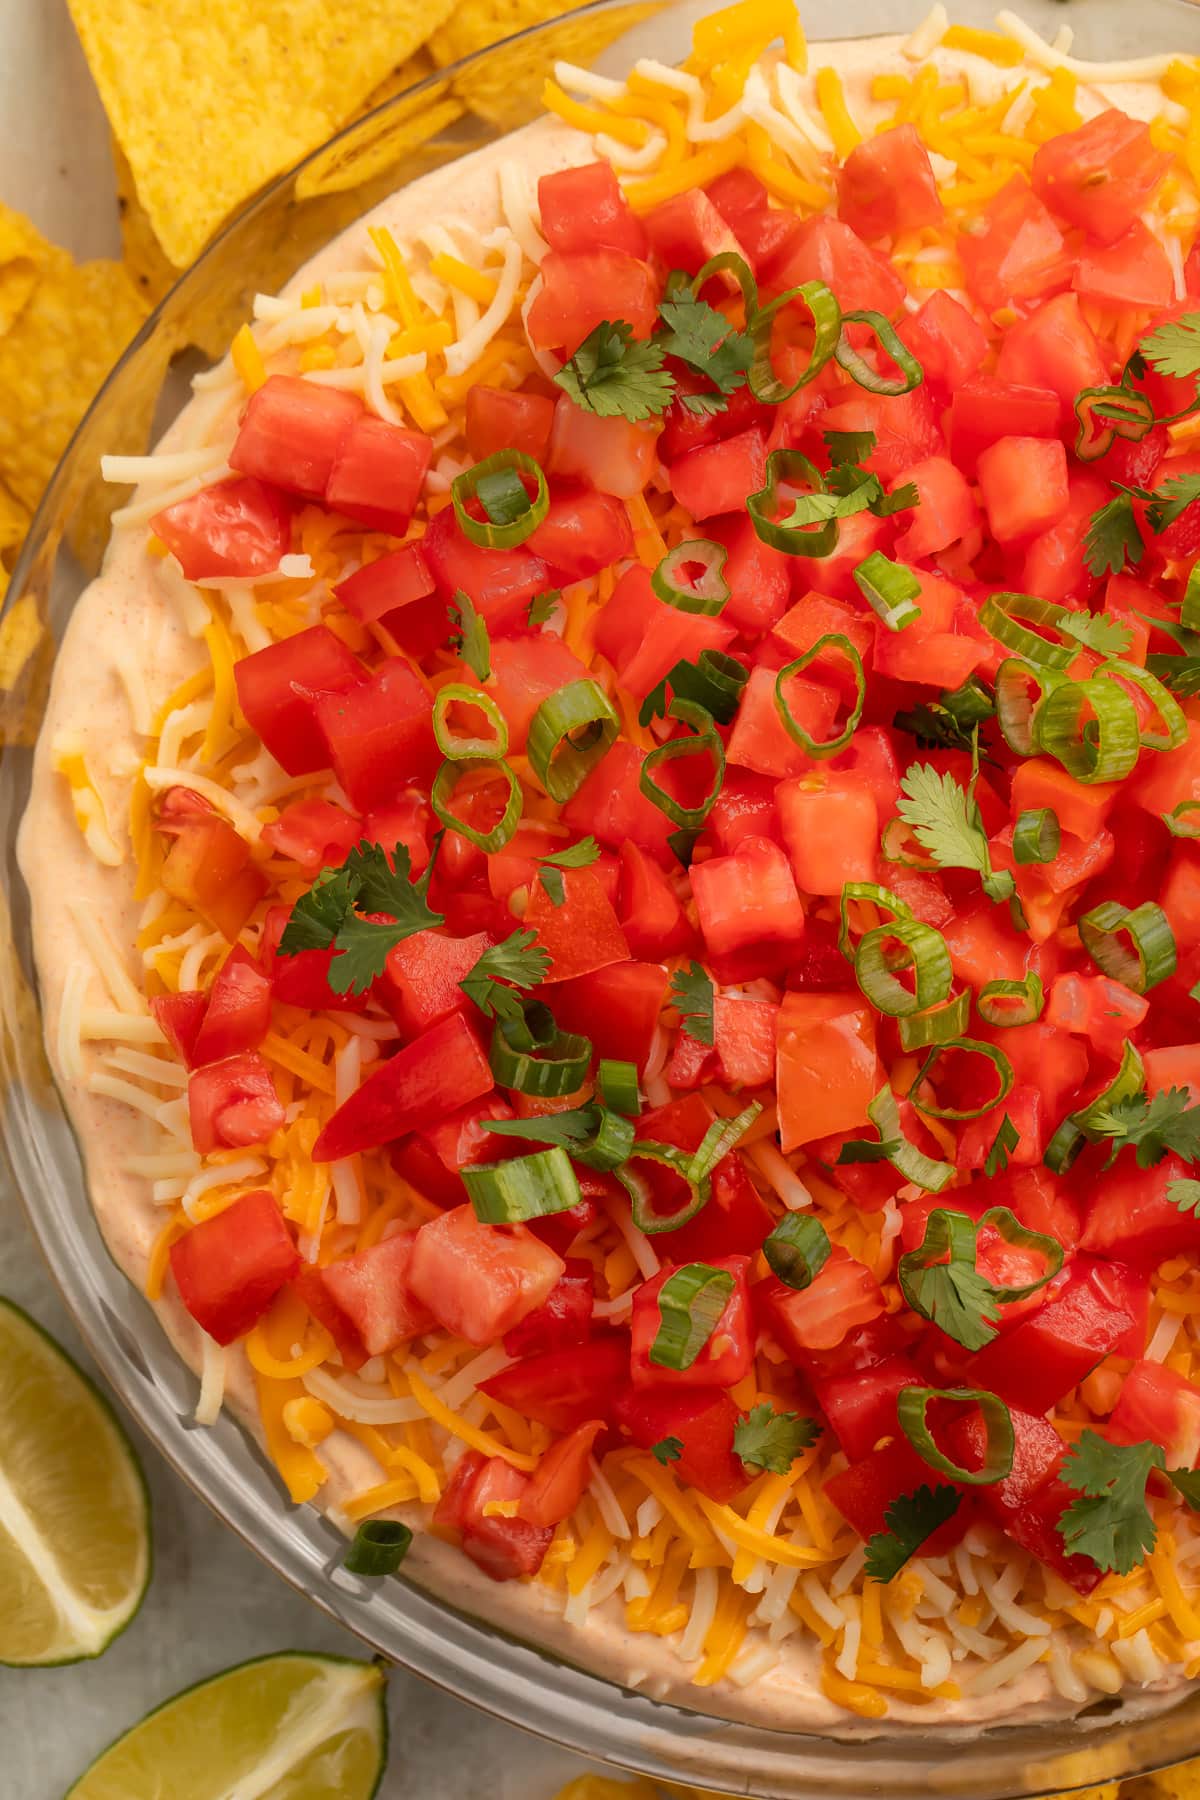 Top-down, overhead view of a 5 layer dip topped with gorgeous bright red tomatoes. Half the bowl is out of frame on the right side of the image.